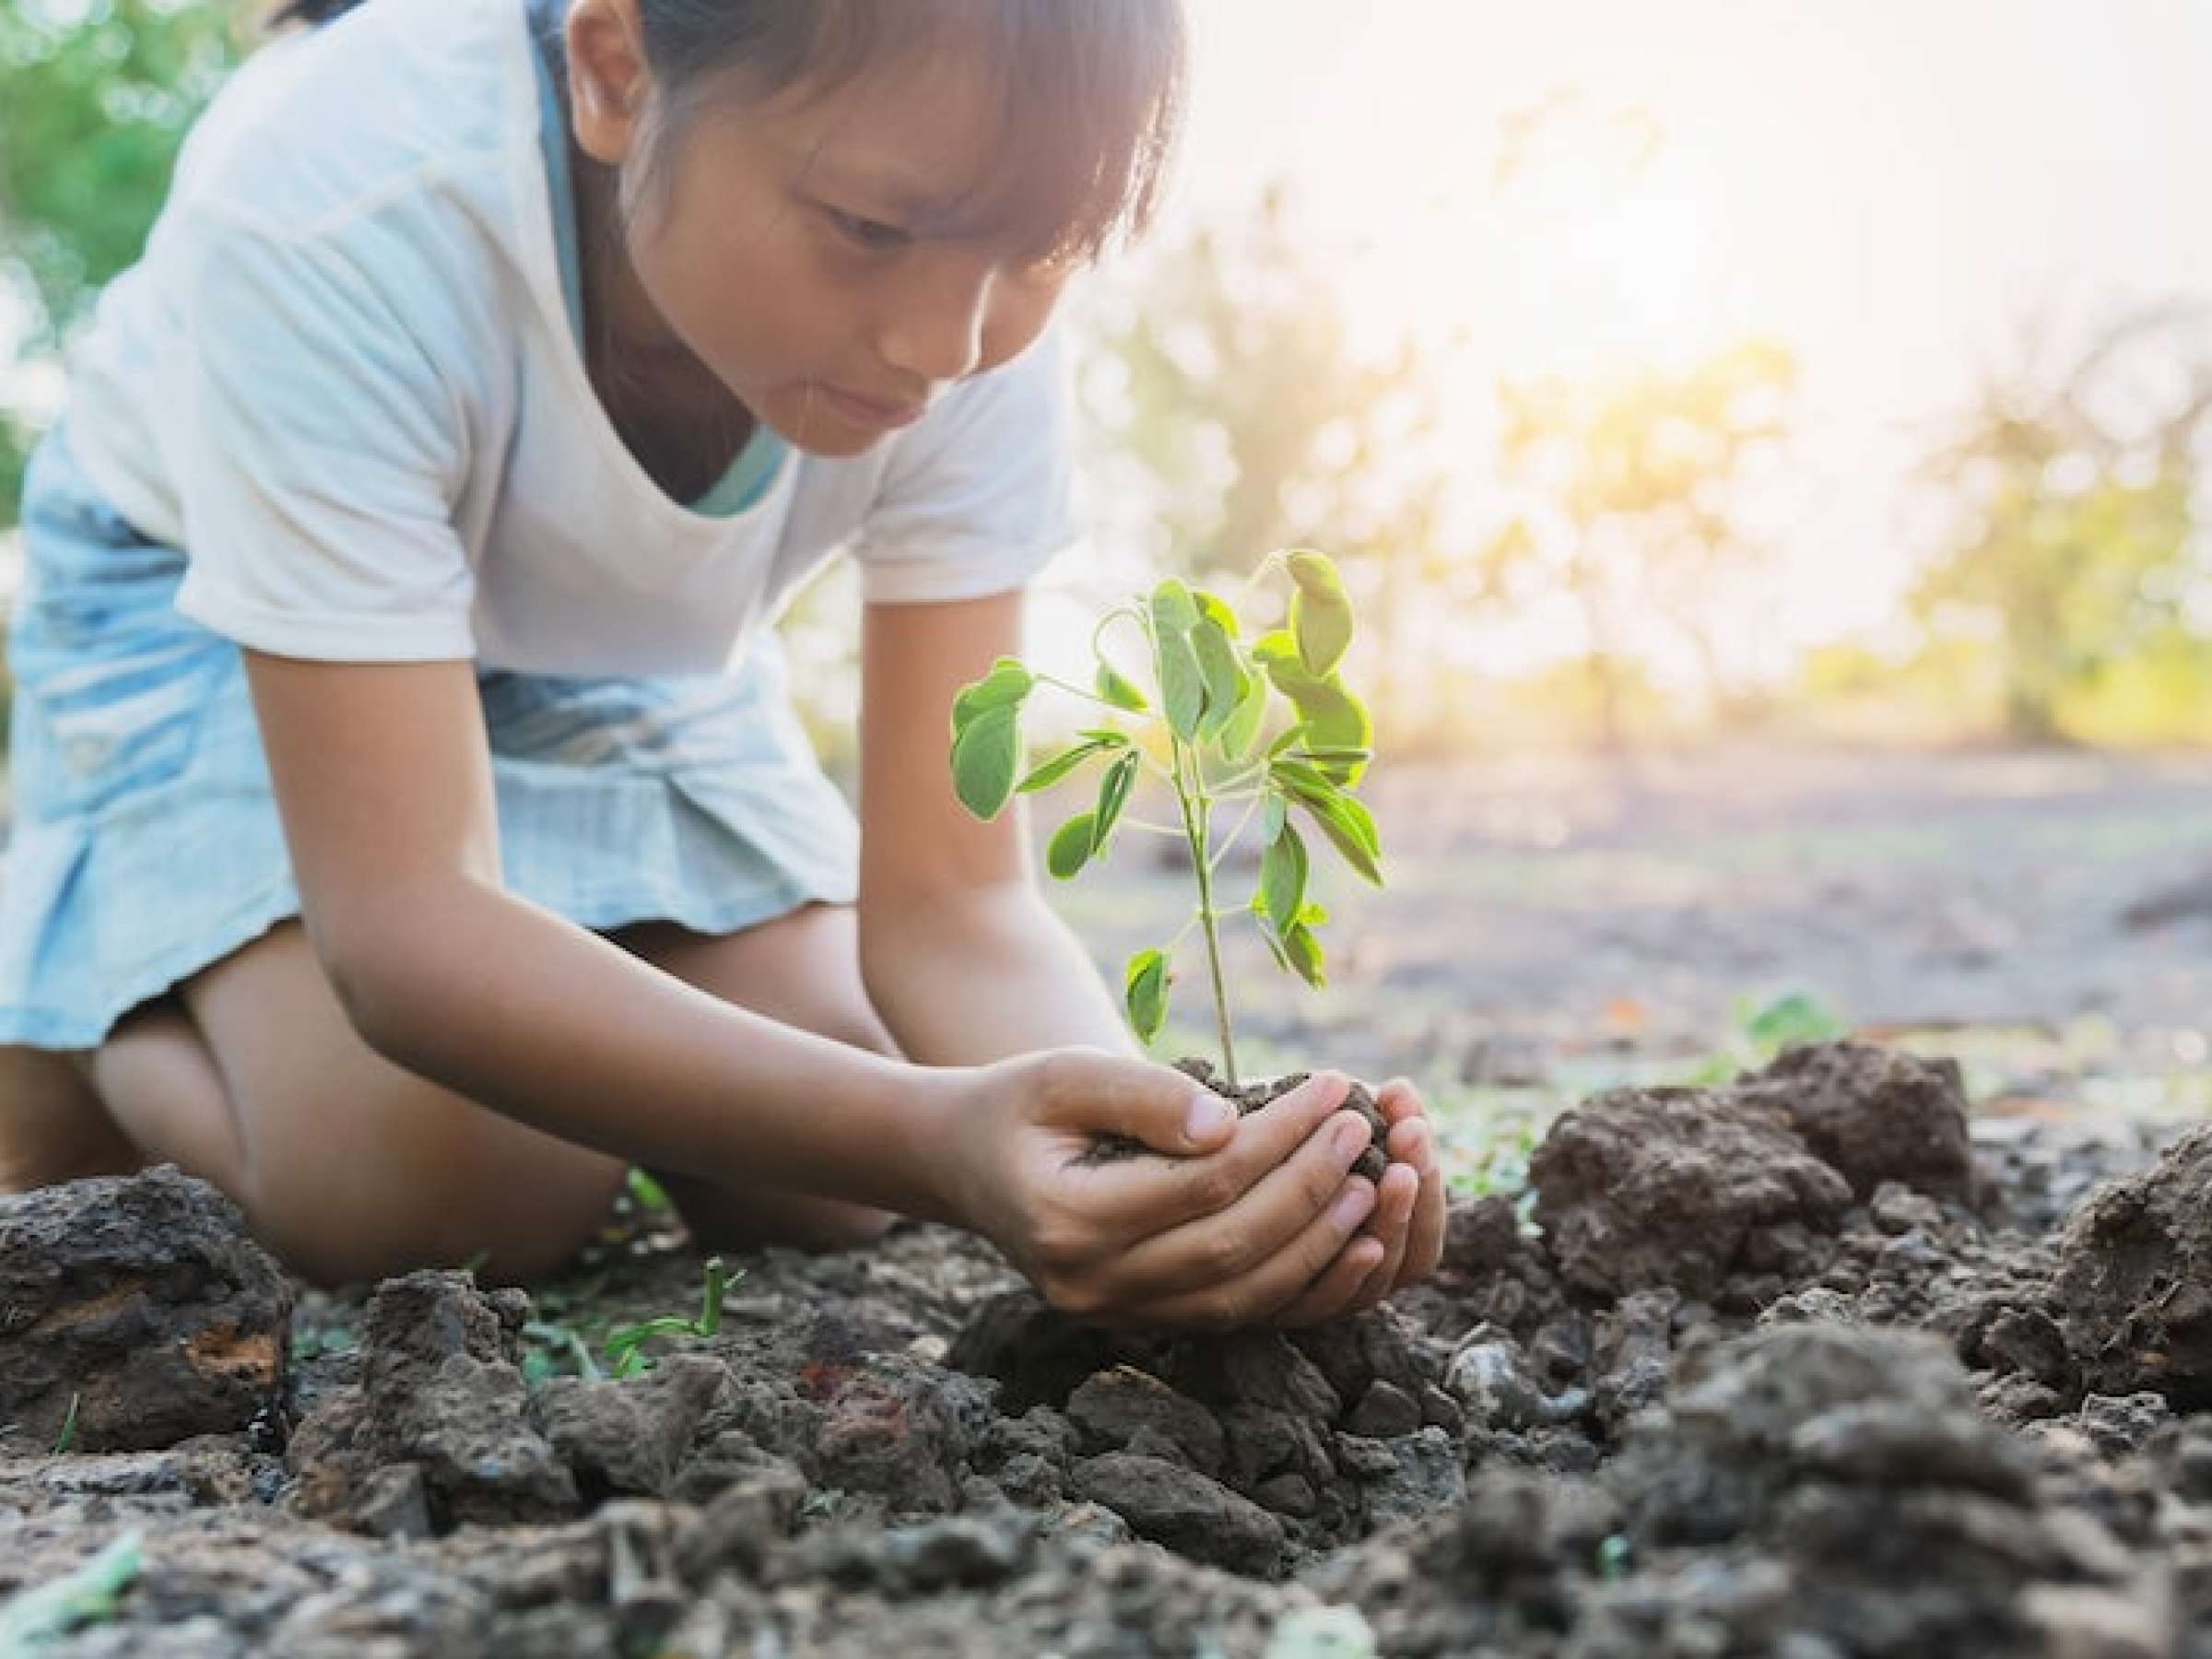 children planting young tree on soil in garden